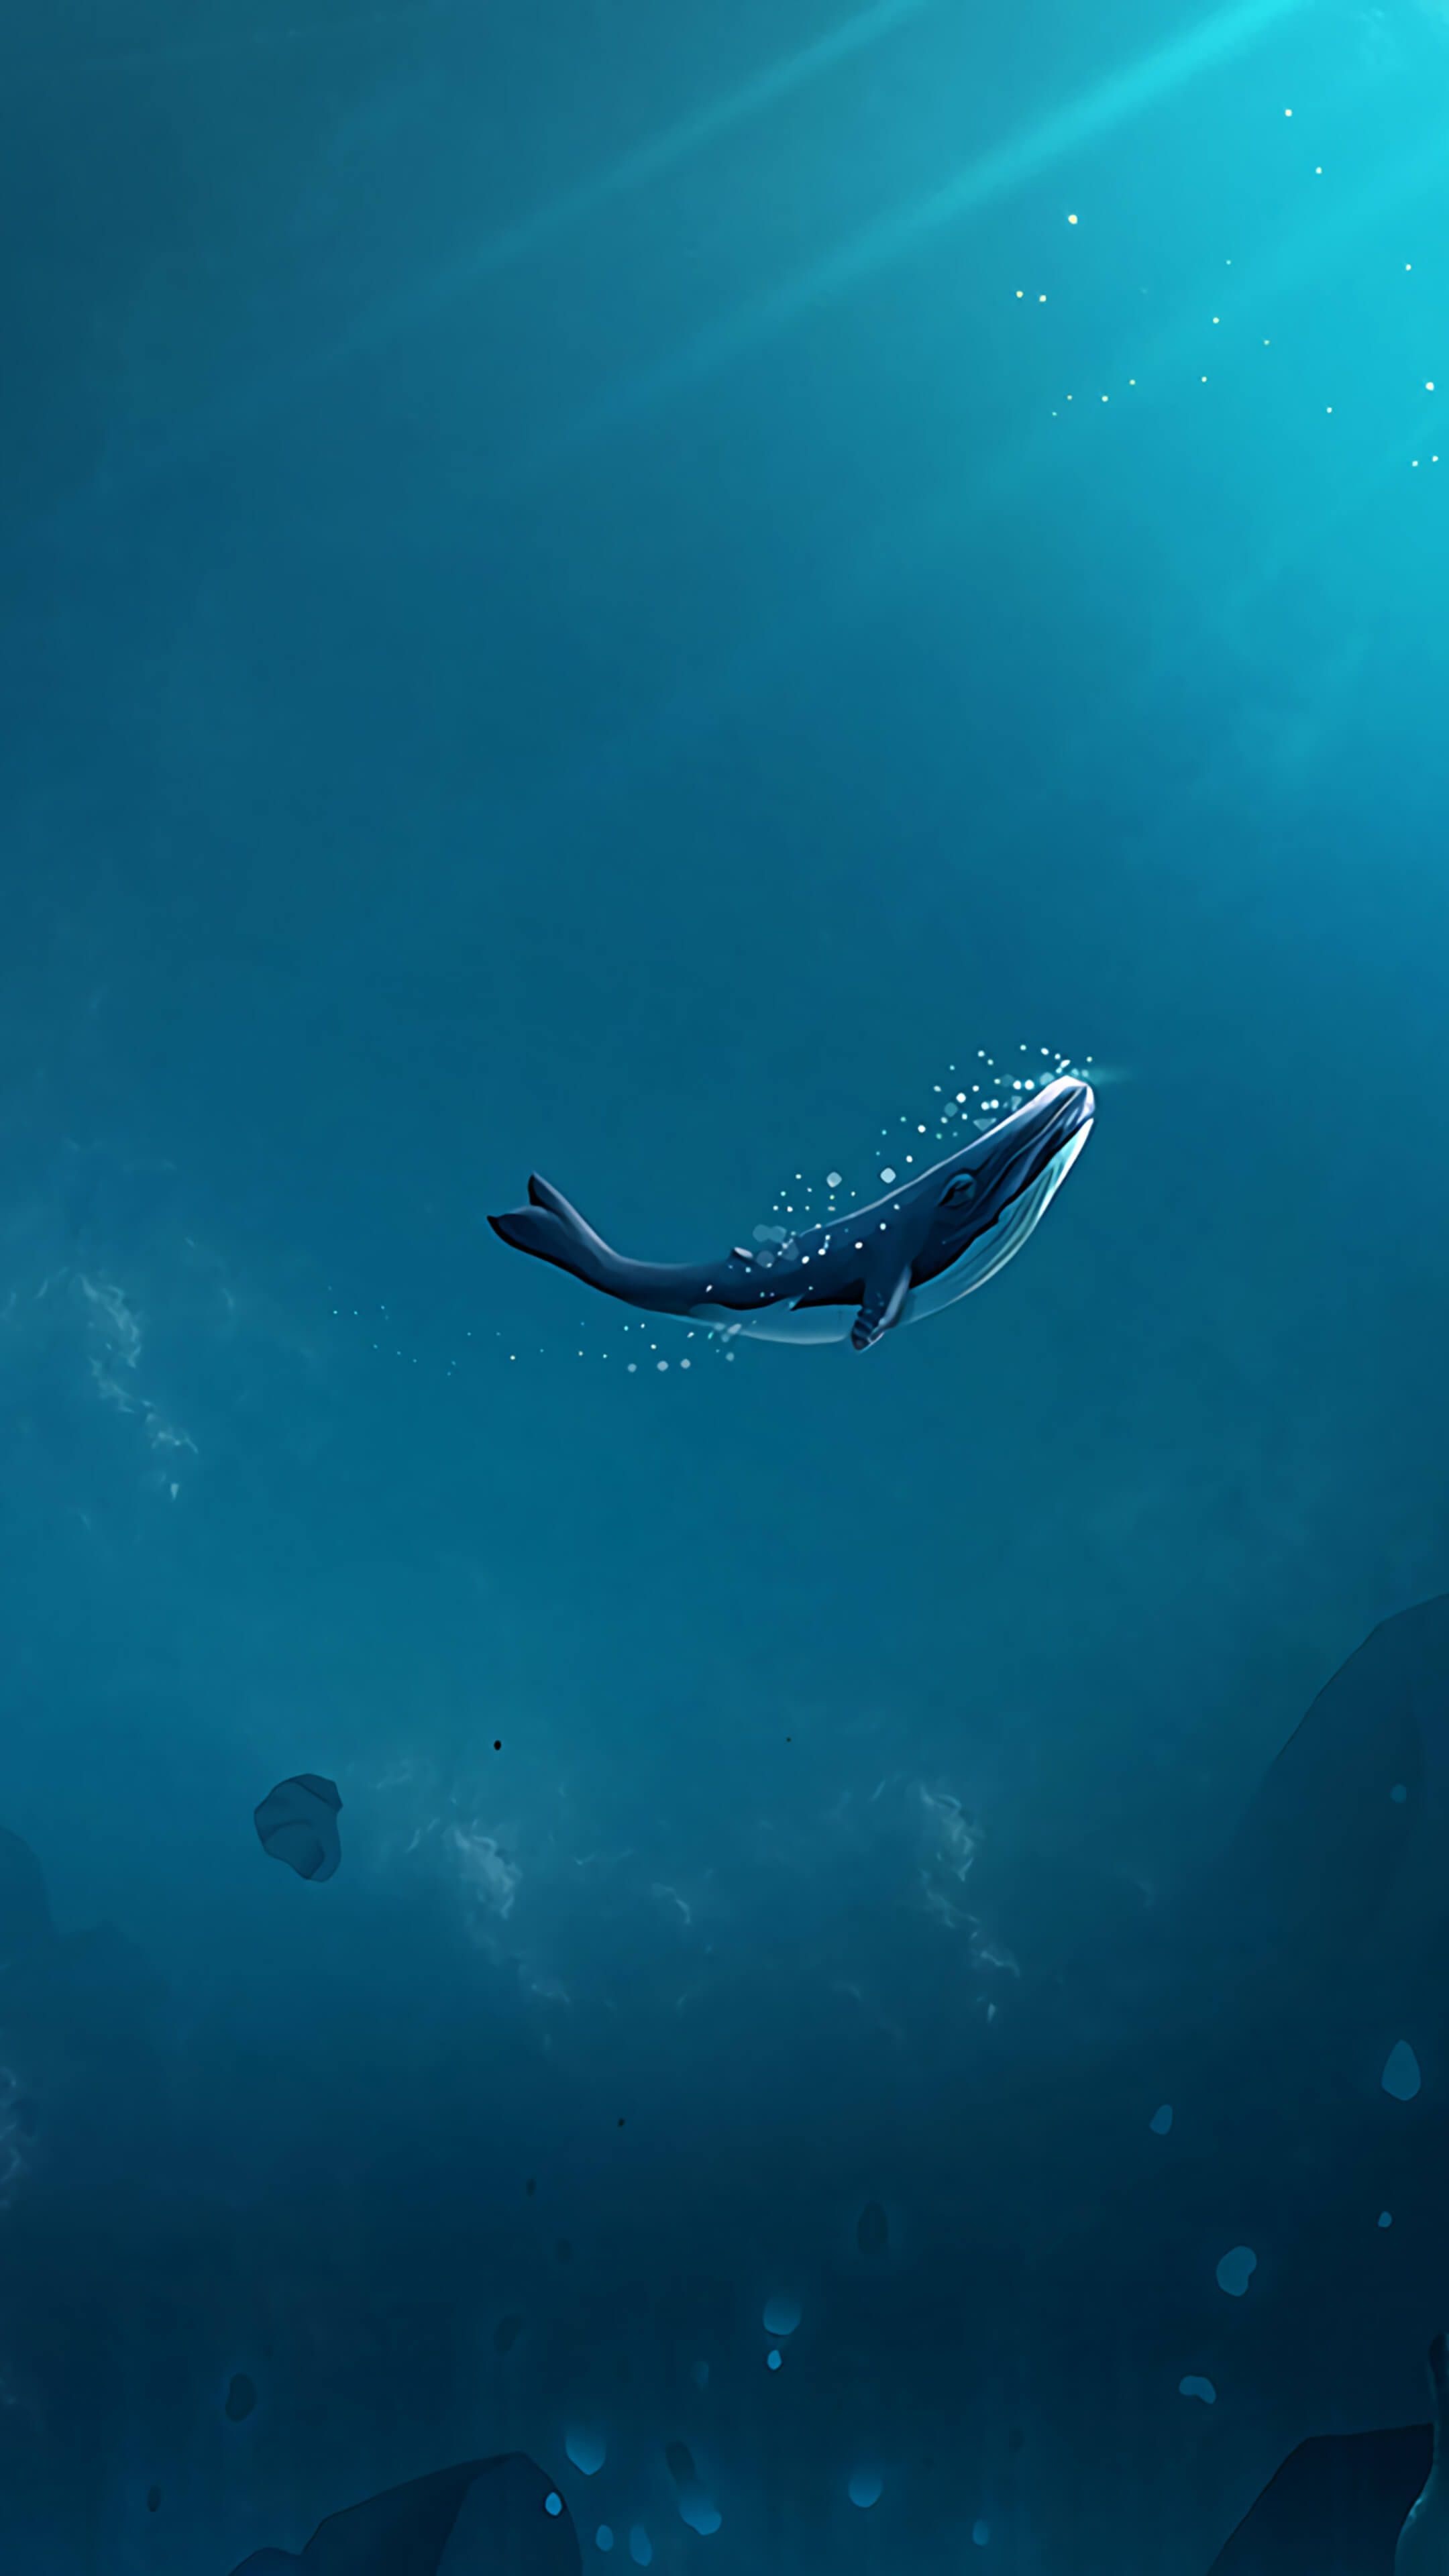 Whale wallpaper delight, Majestic sea mammal, Underwater charm, Nature's gentle giant, 2160x3840 4K Phone